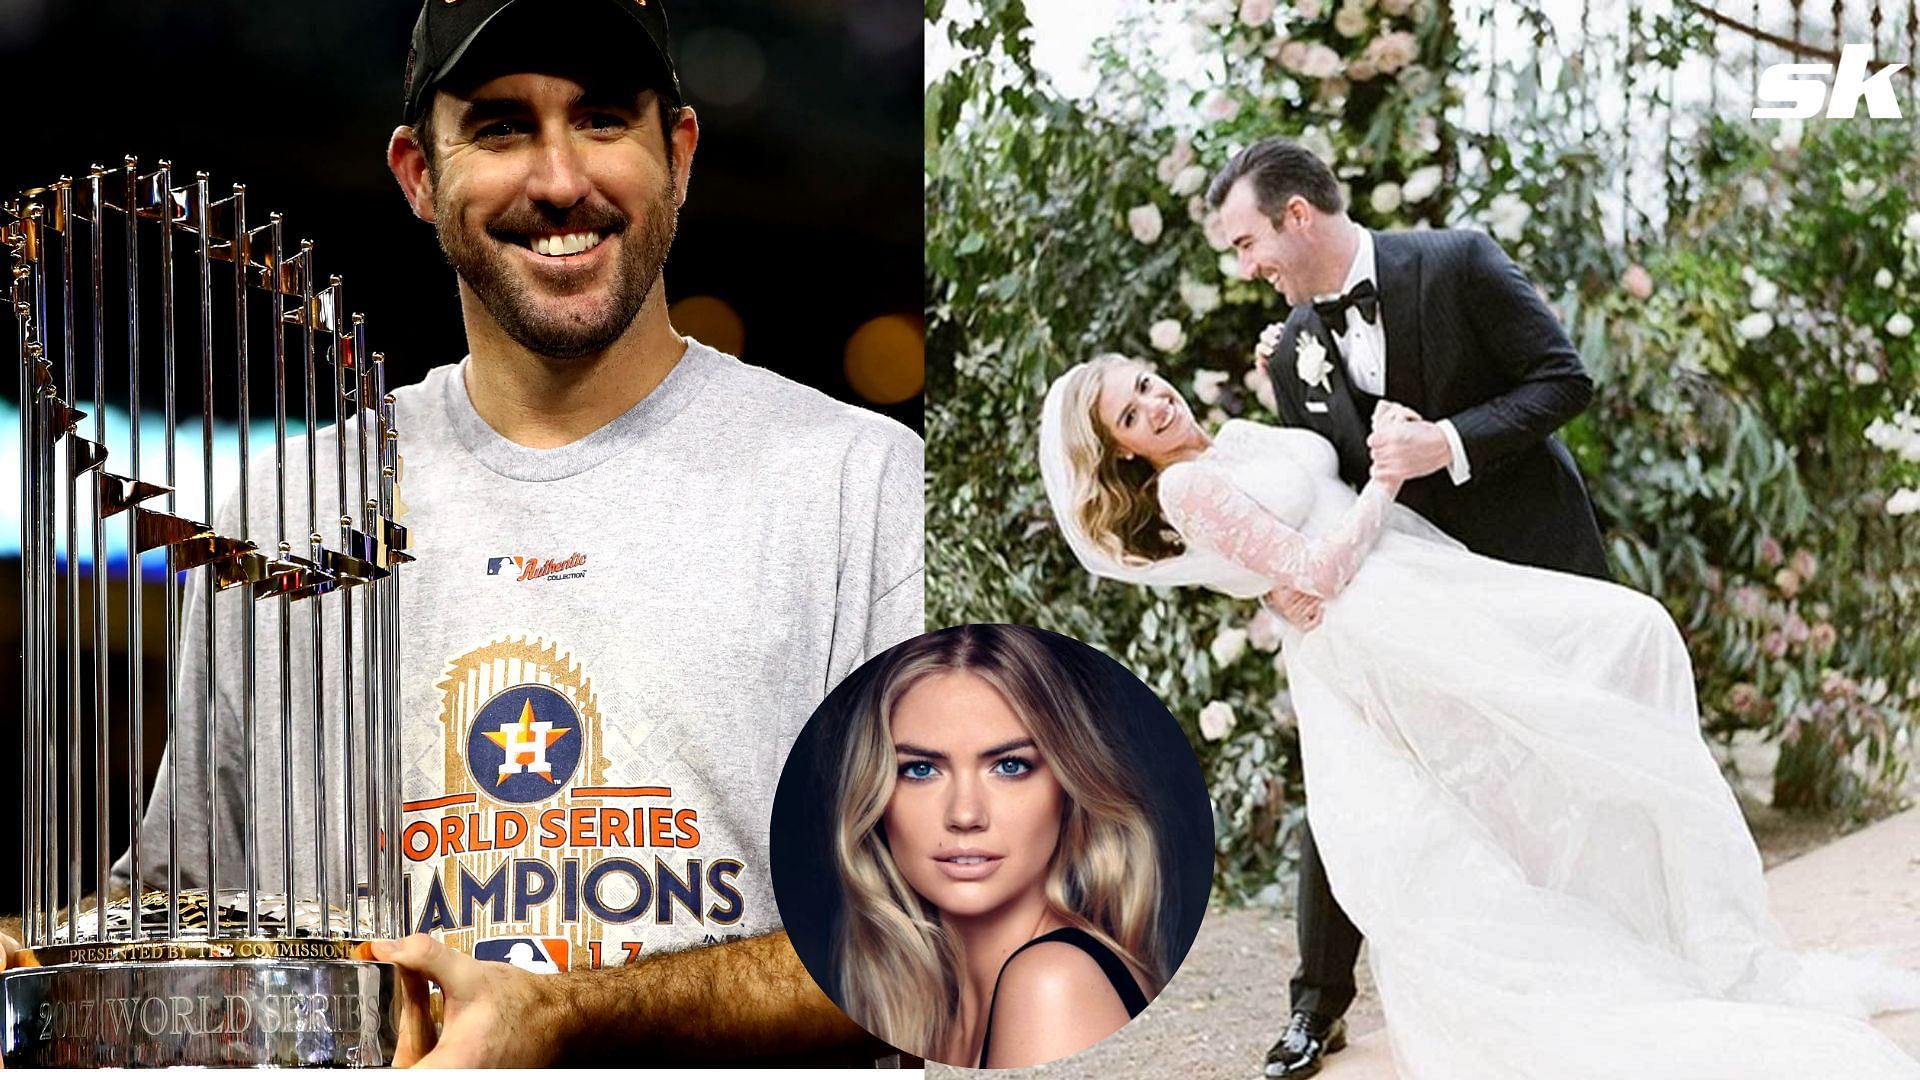 Kate Upton coaxed Justin Verlander into answering a tricky